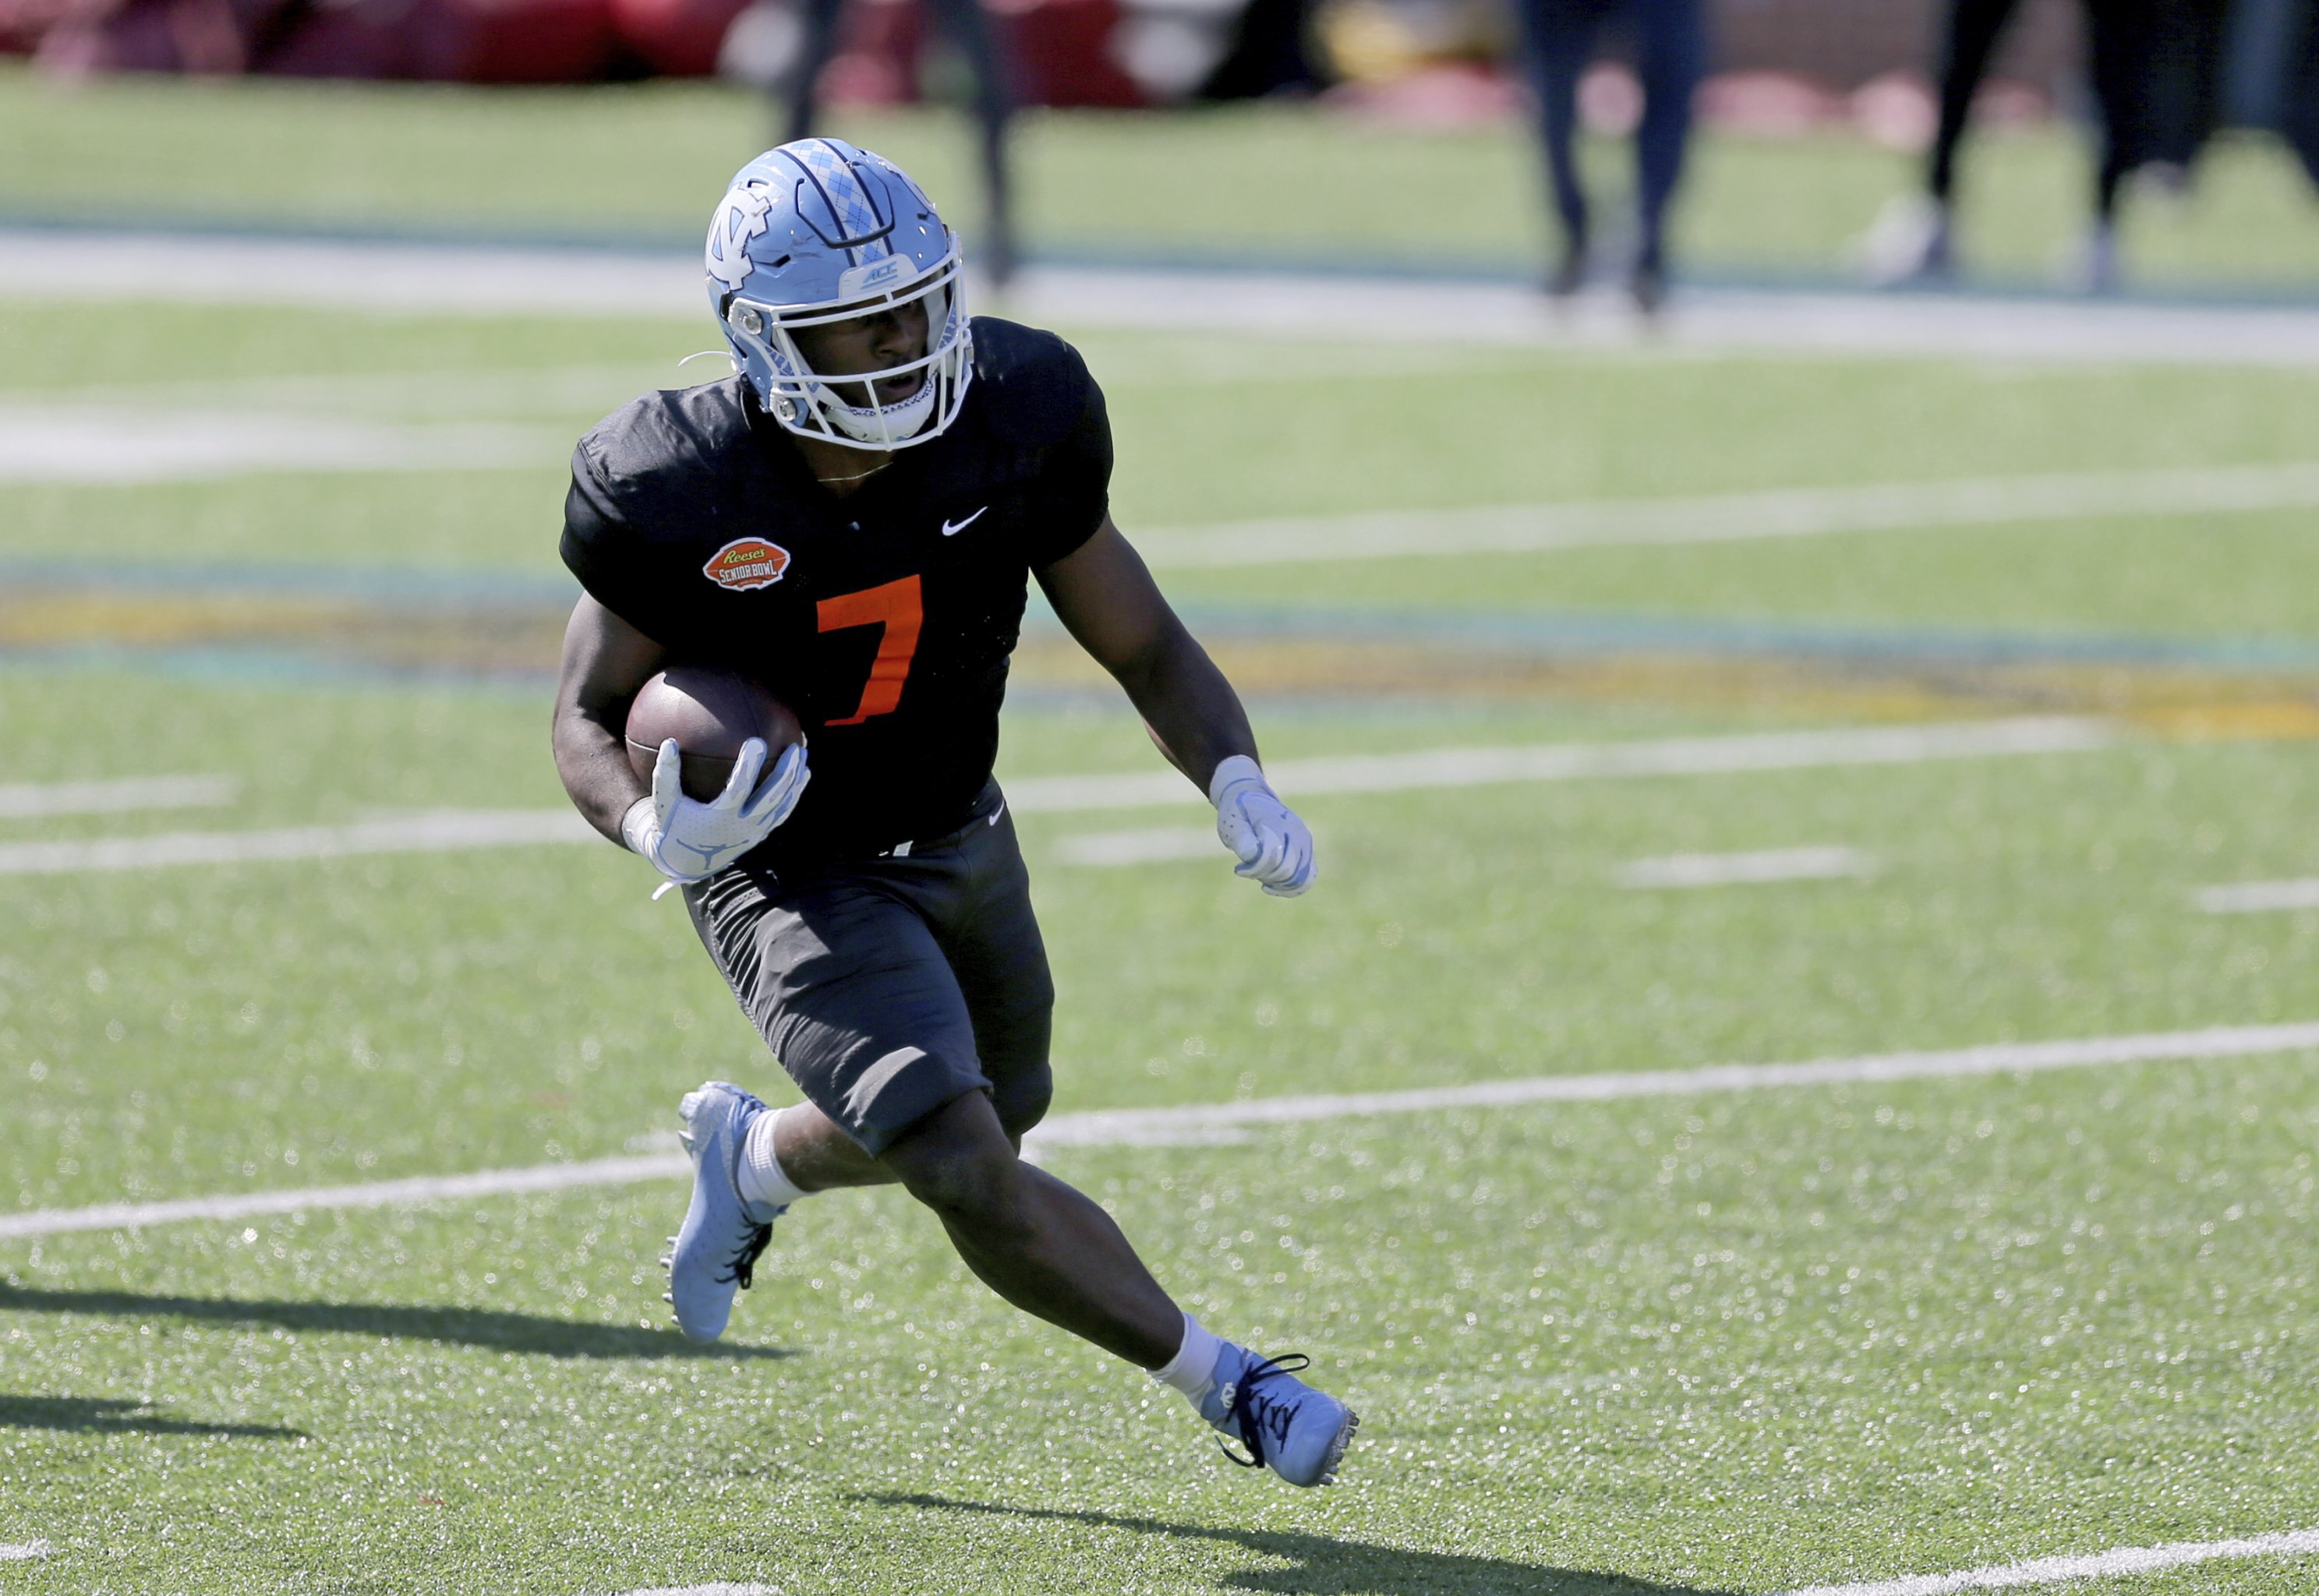 Senior Bowl 2021 Results and Prospects Who Boosted Draft Stock at Showcase